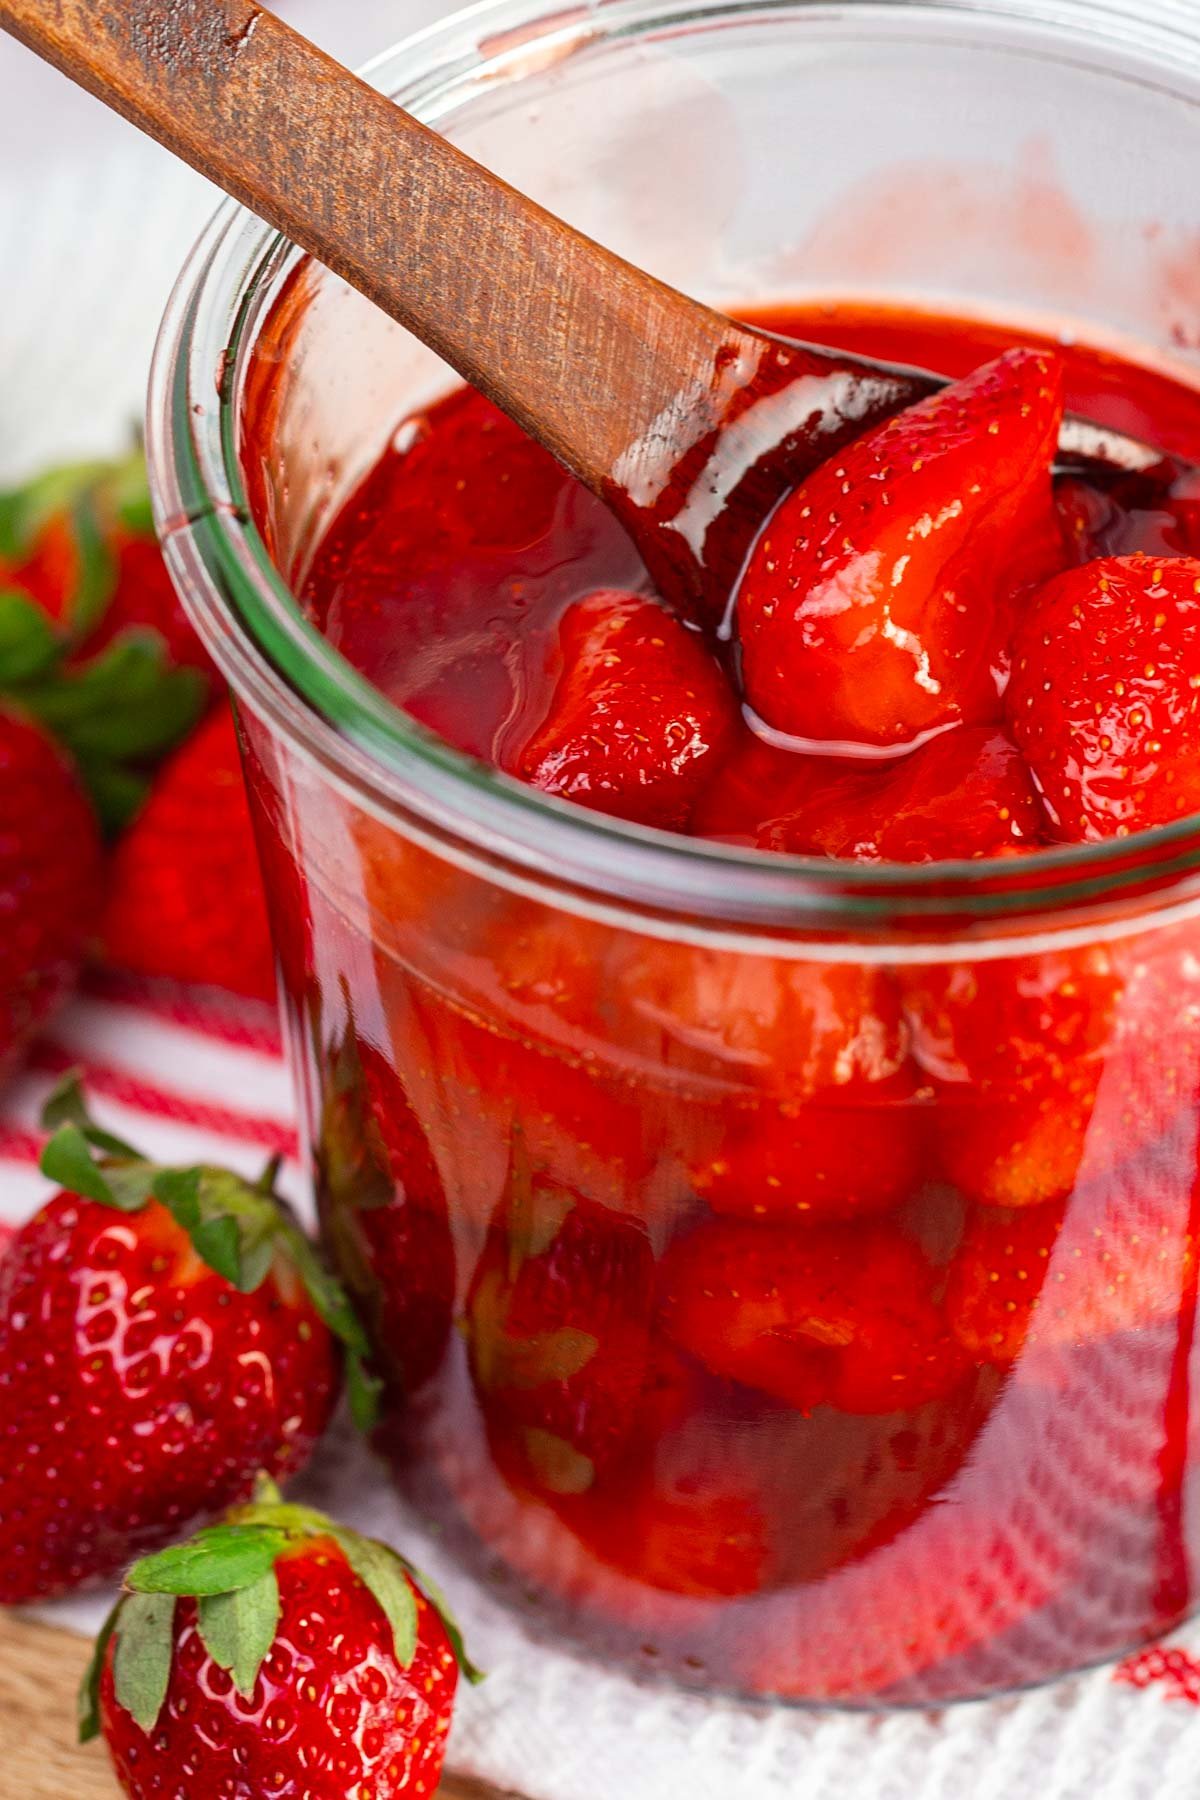 Chunky strawberry sauce in glass jar with wooden spoon.